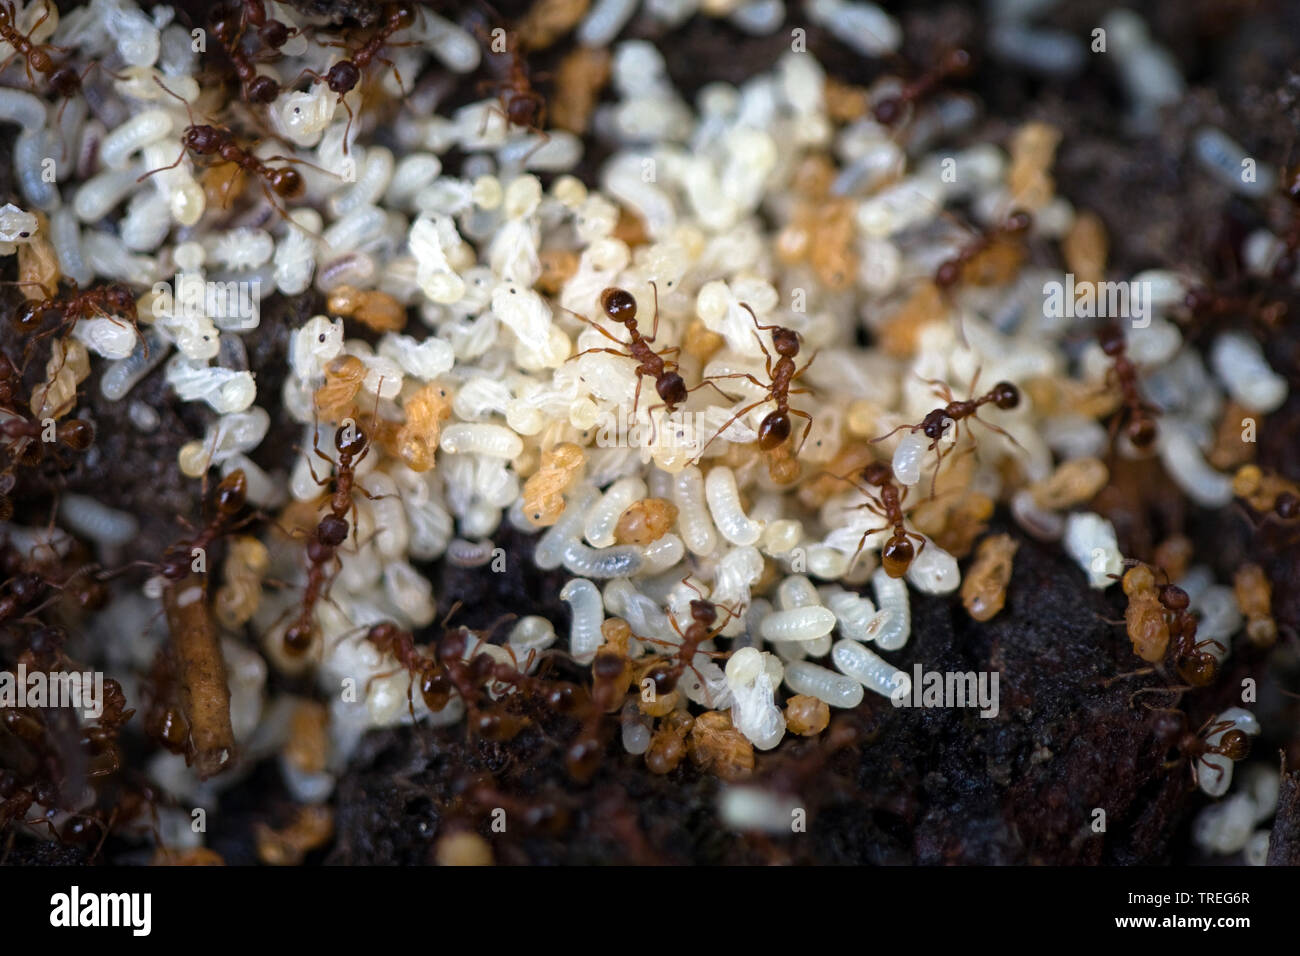 Ant nest with eggs and imagos, Germany Stock Photo